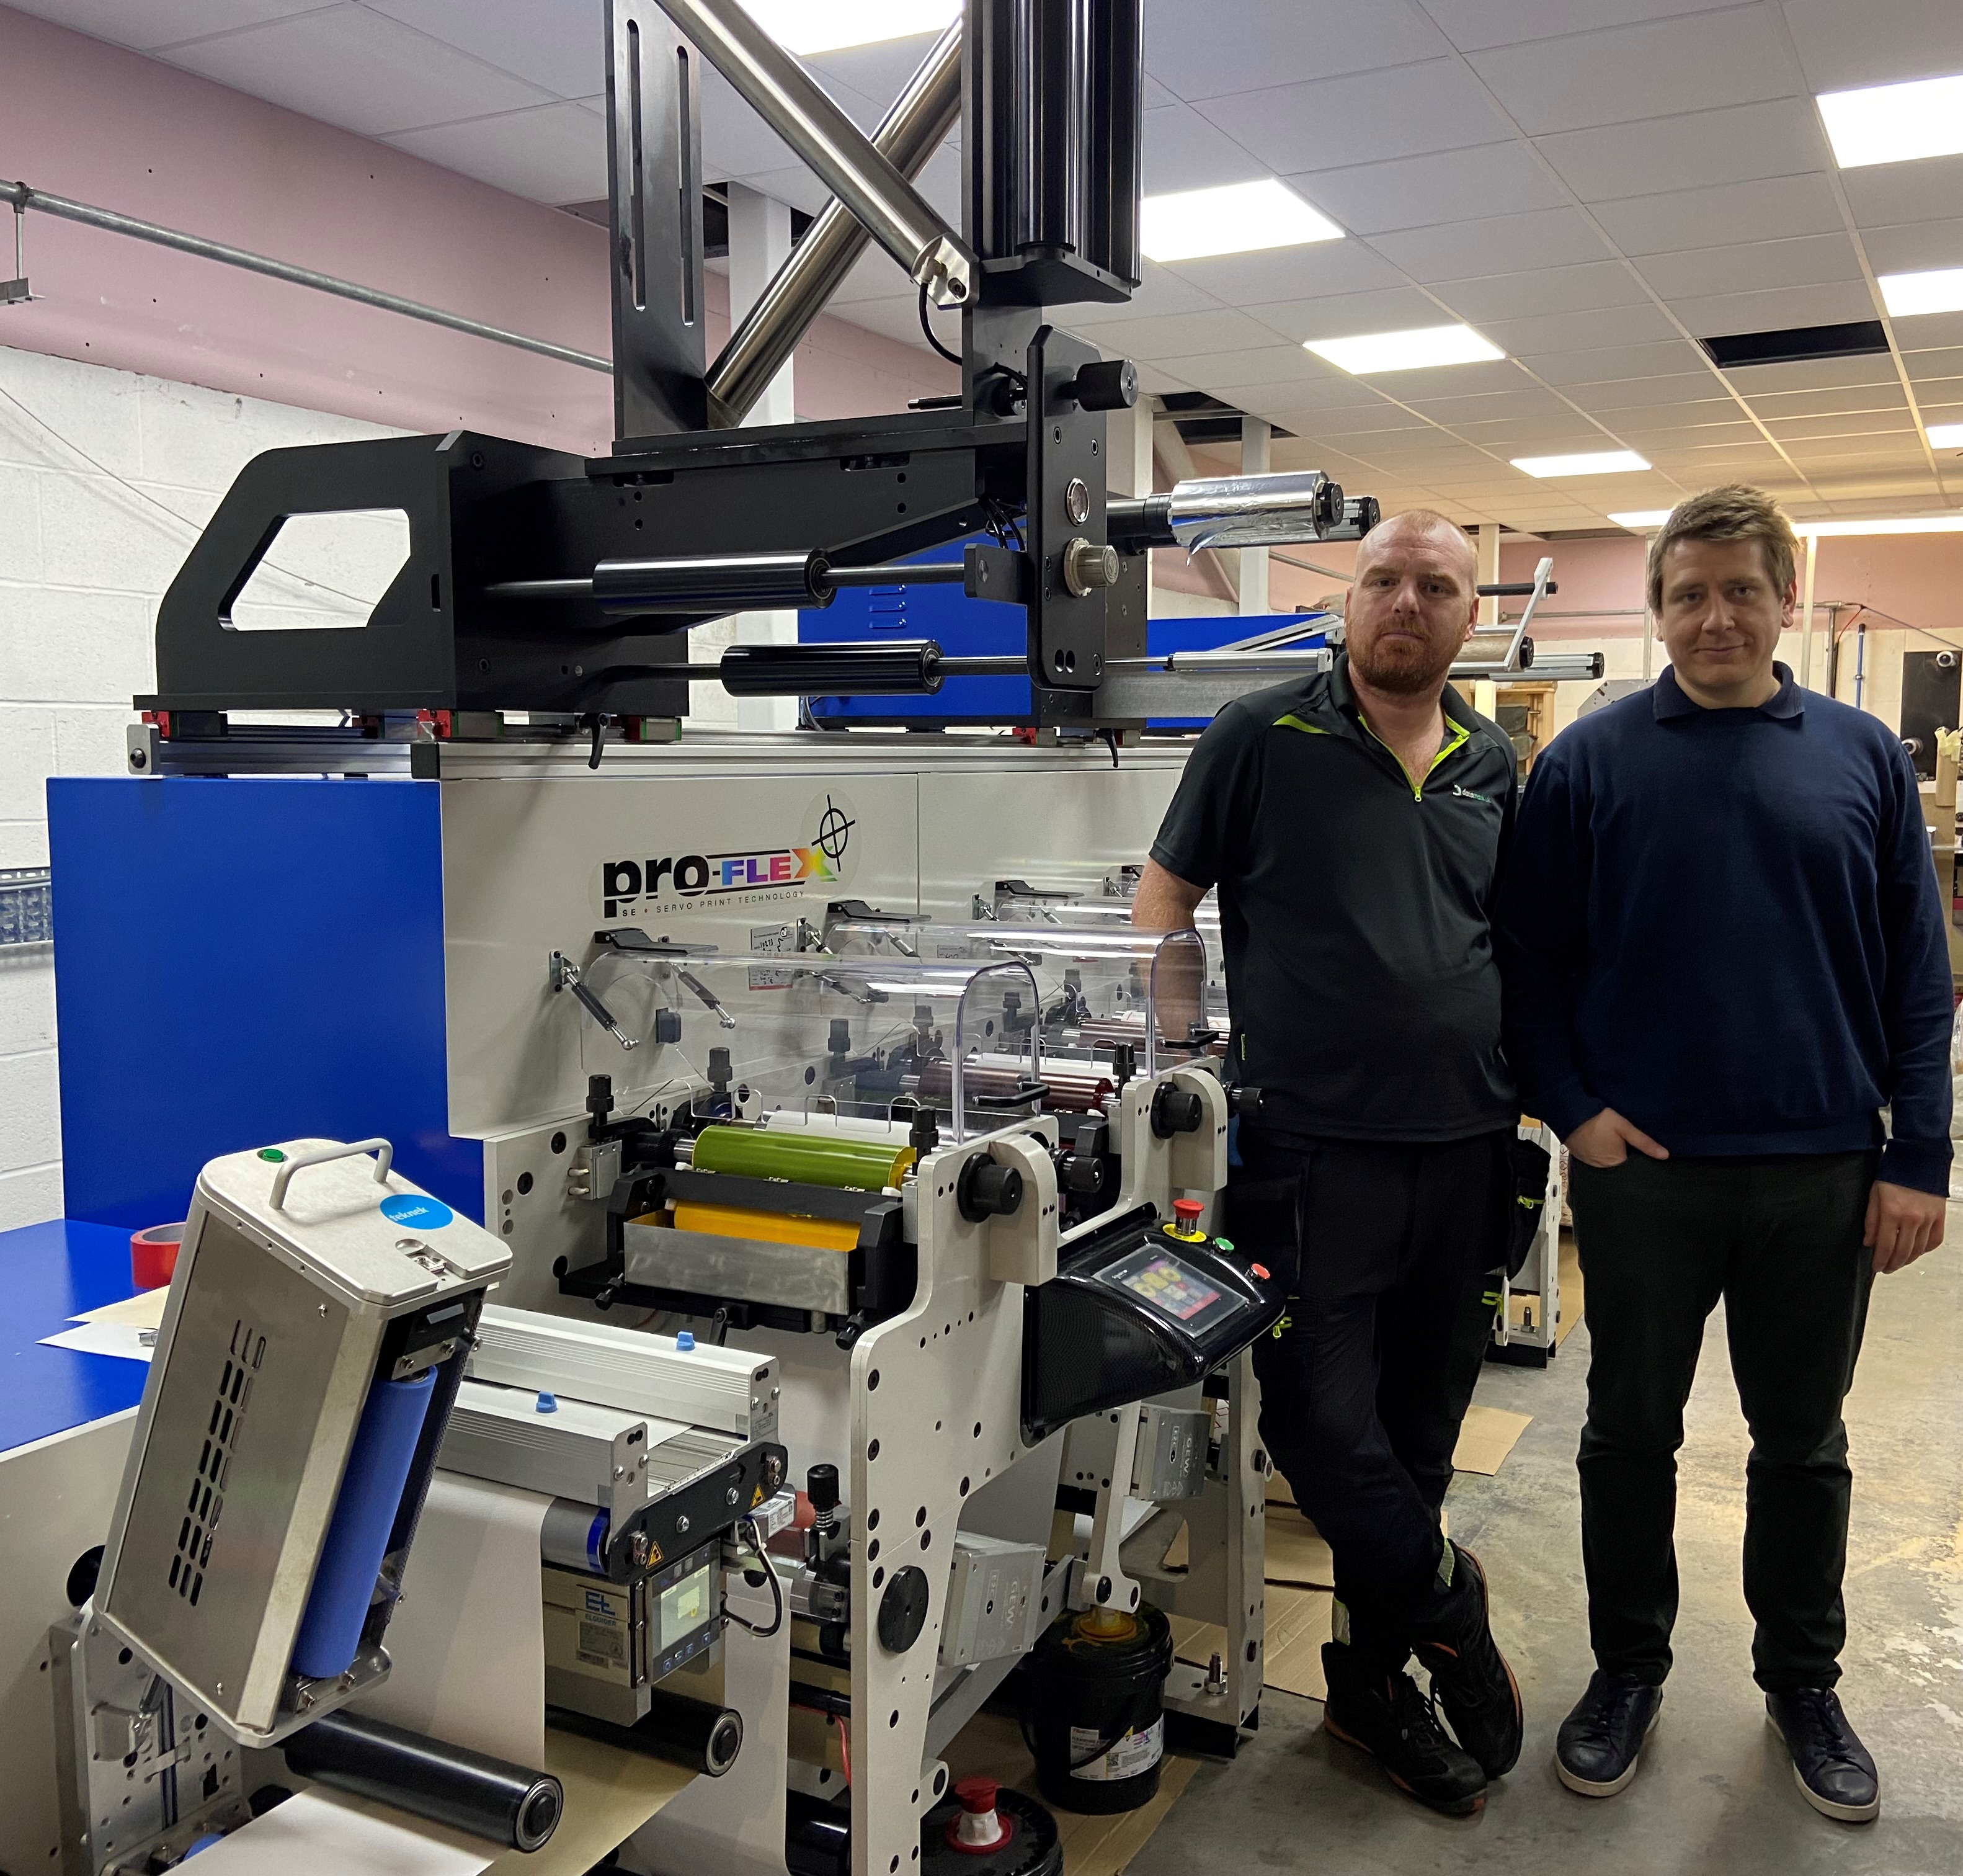 Two men stood proudly next to the newly installed Proflex SE printer at DATAMARK.